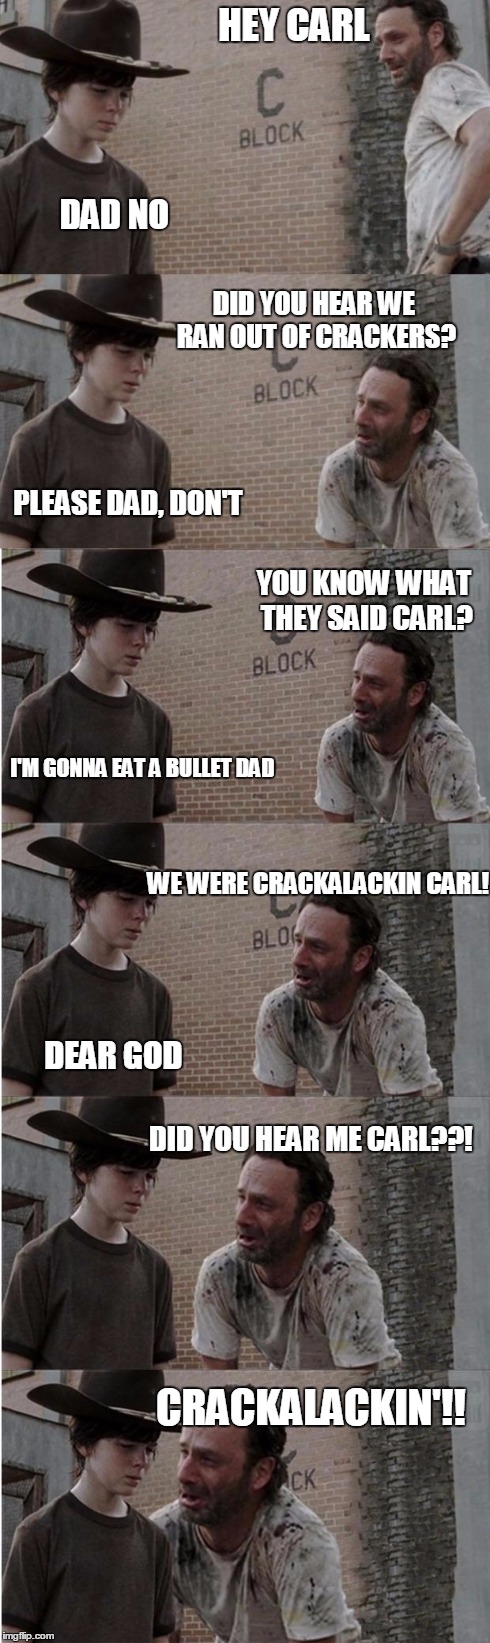 Rick and Carl Longer Meme | HEY CARL DAD NO DID YOU HEAR WE RAN OUT OF CRACKERS? PLEASE DAD, DON'T YOU KNOW WHAT THEY SAID CARL? I'M GONNA EAT A BULLET DAD WE WERE CRAC | image tagged in memes,rick and carl longer | made w/ Imgflip meme maker